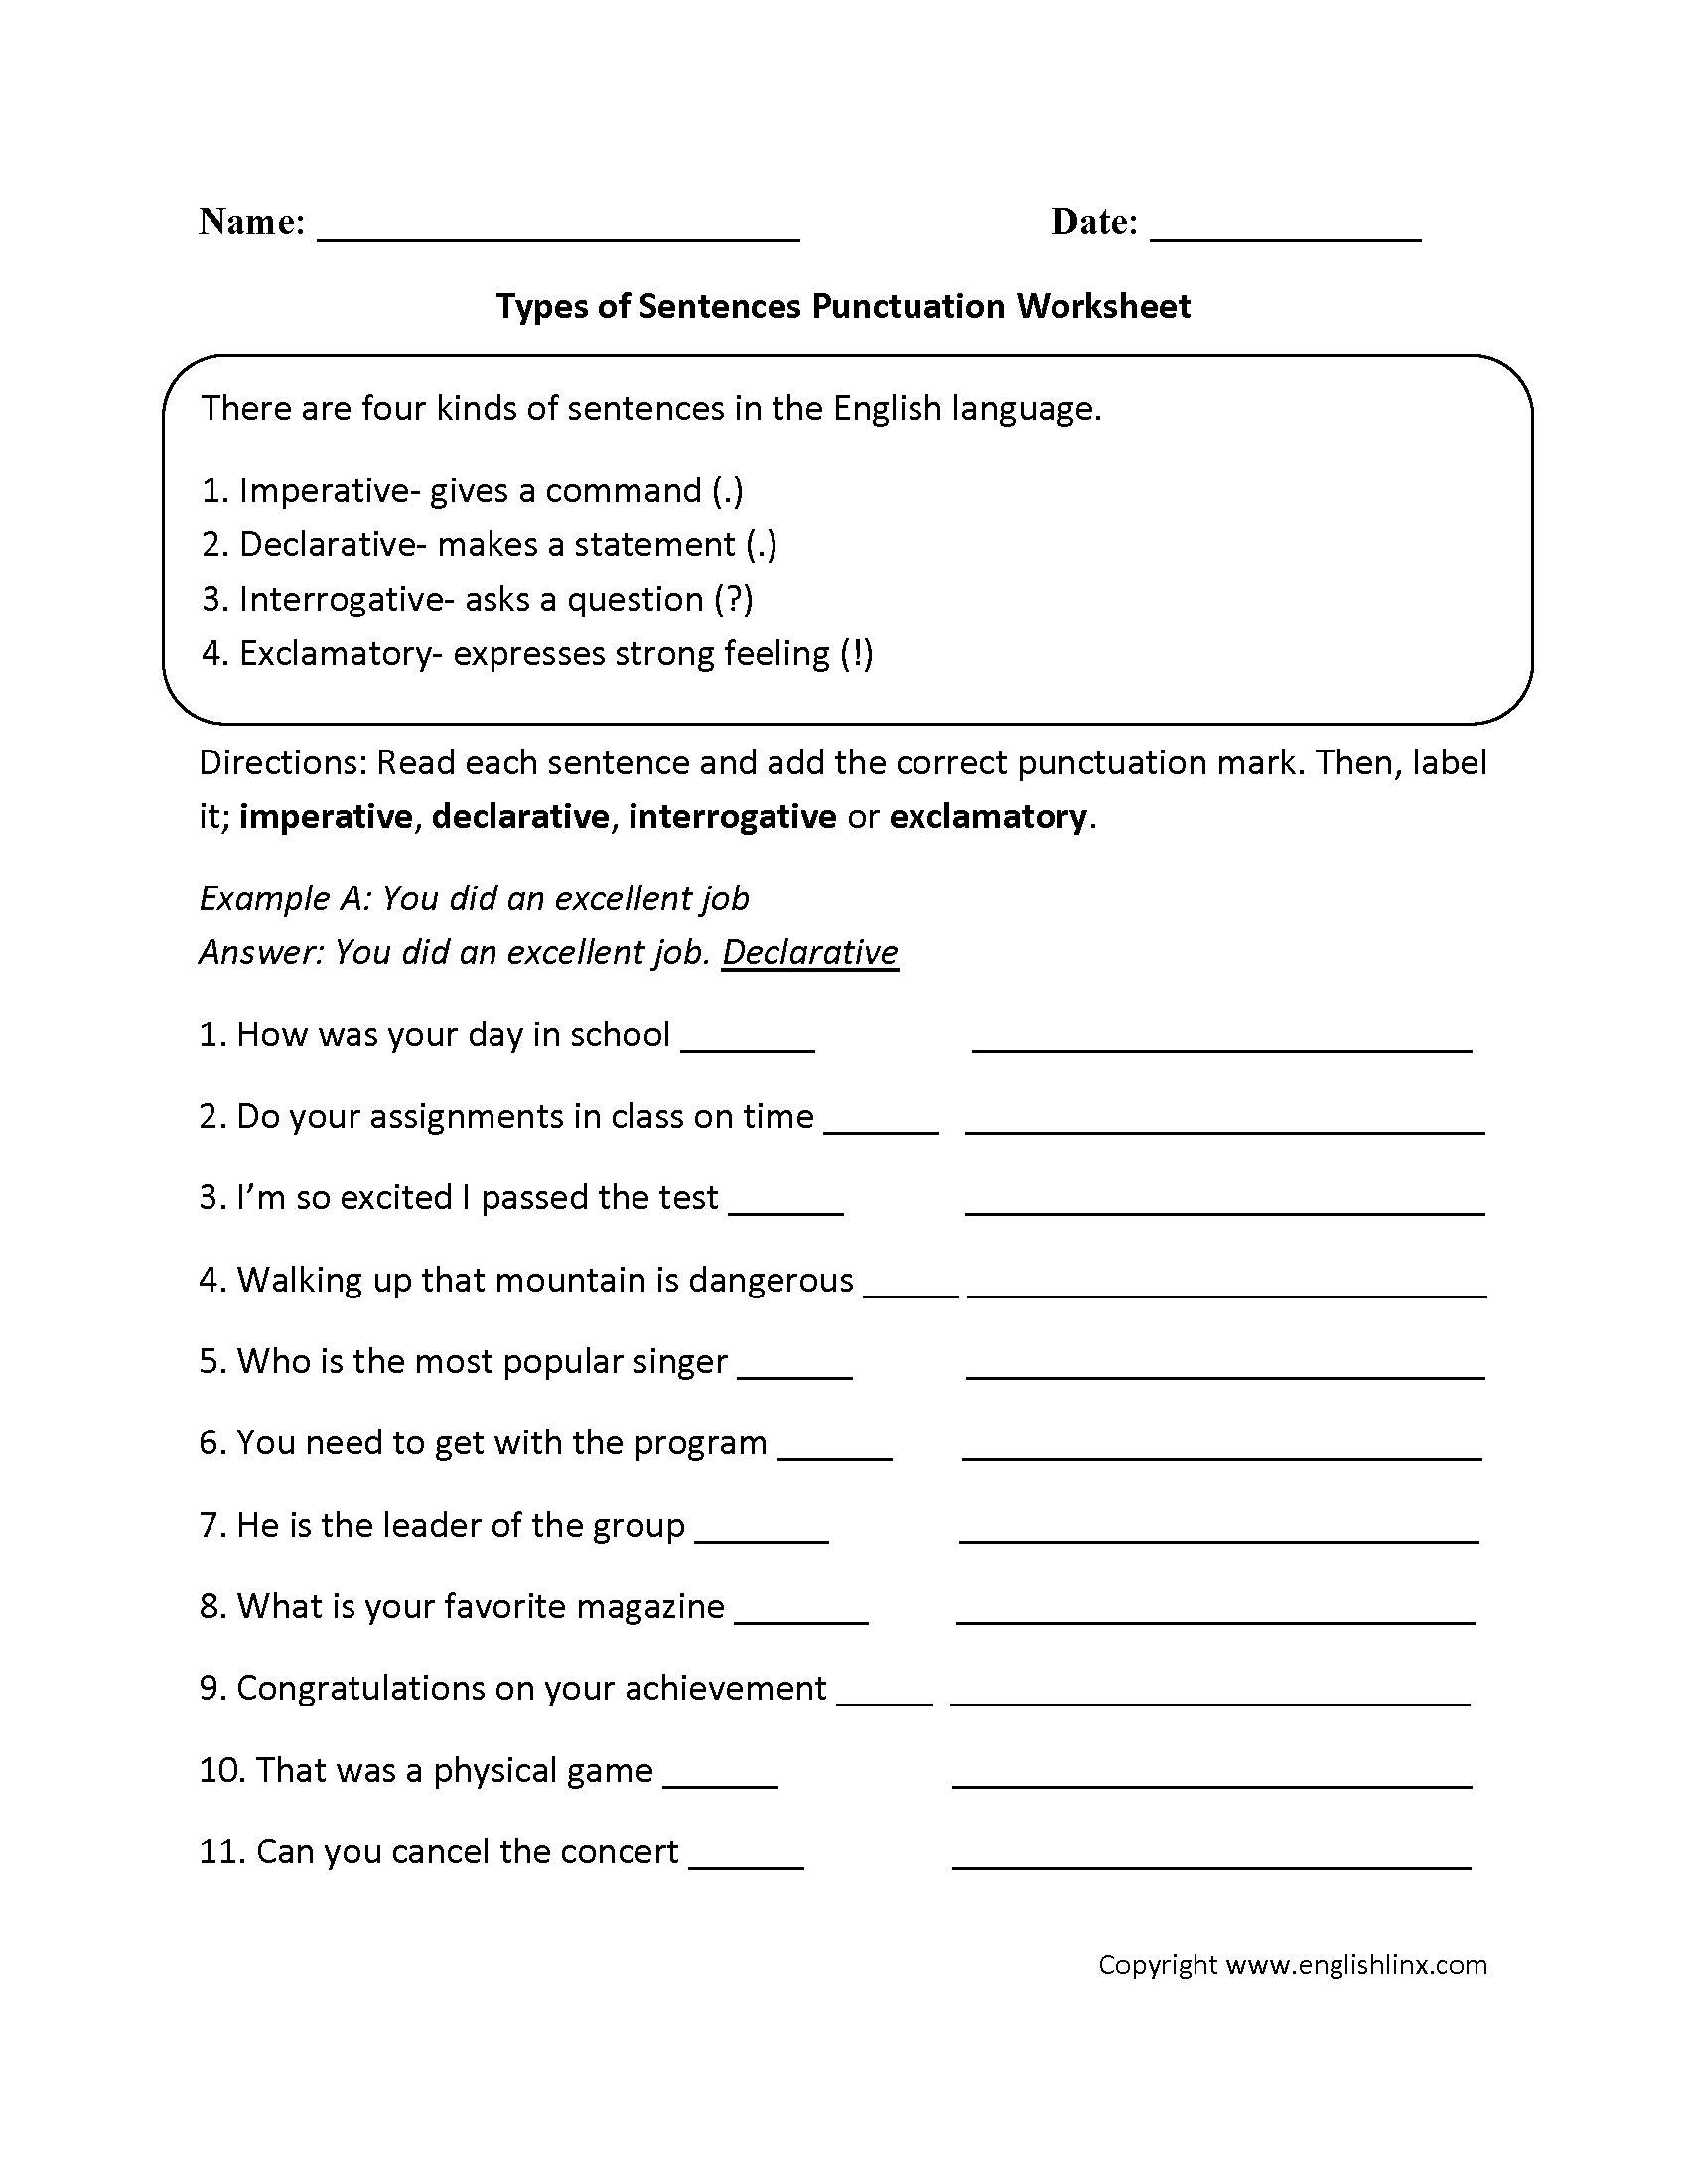 Types of Sentences with Punctuation Worksheet